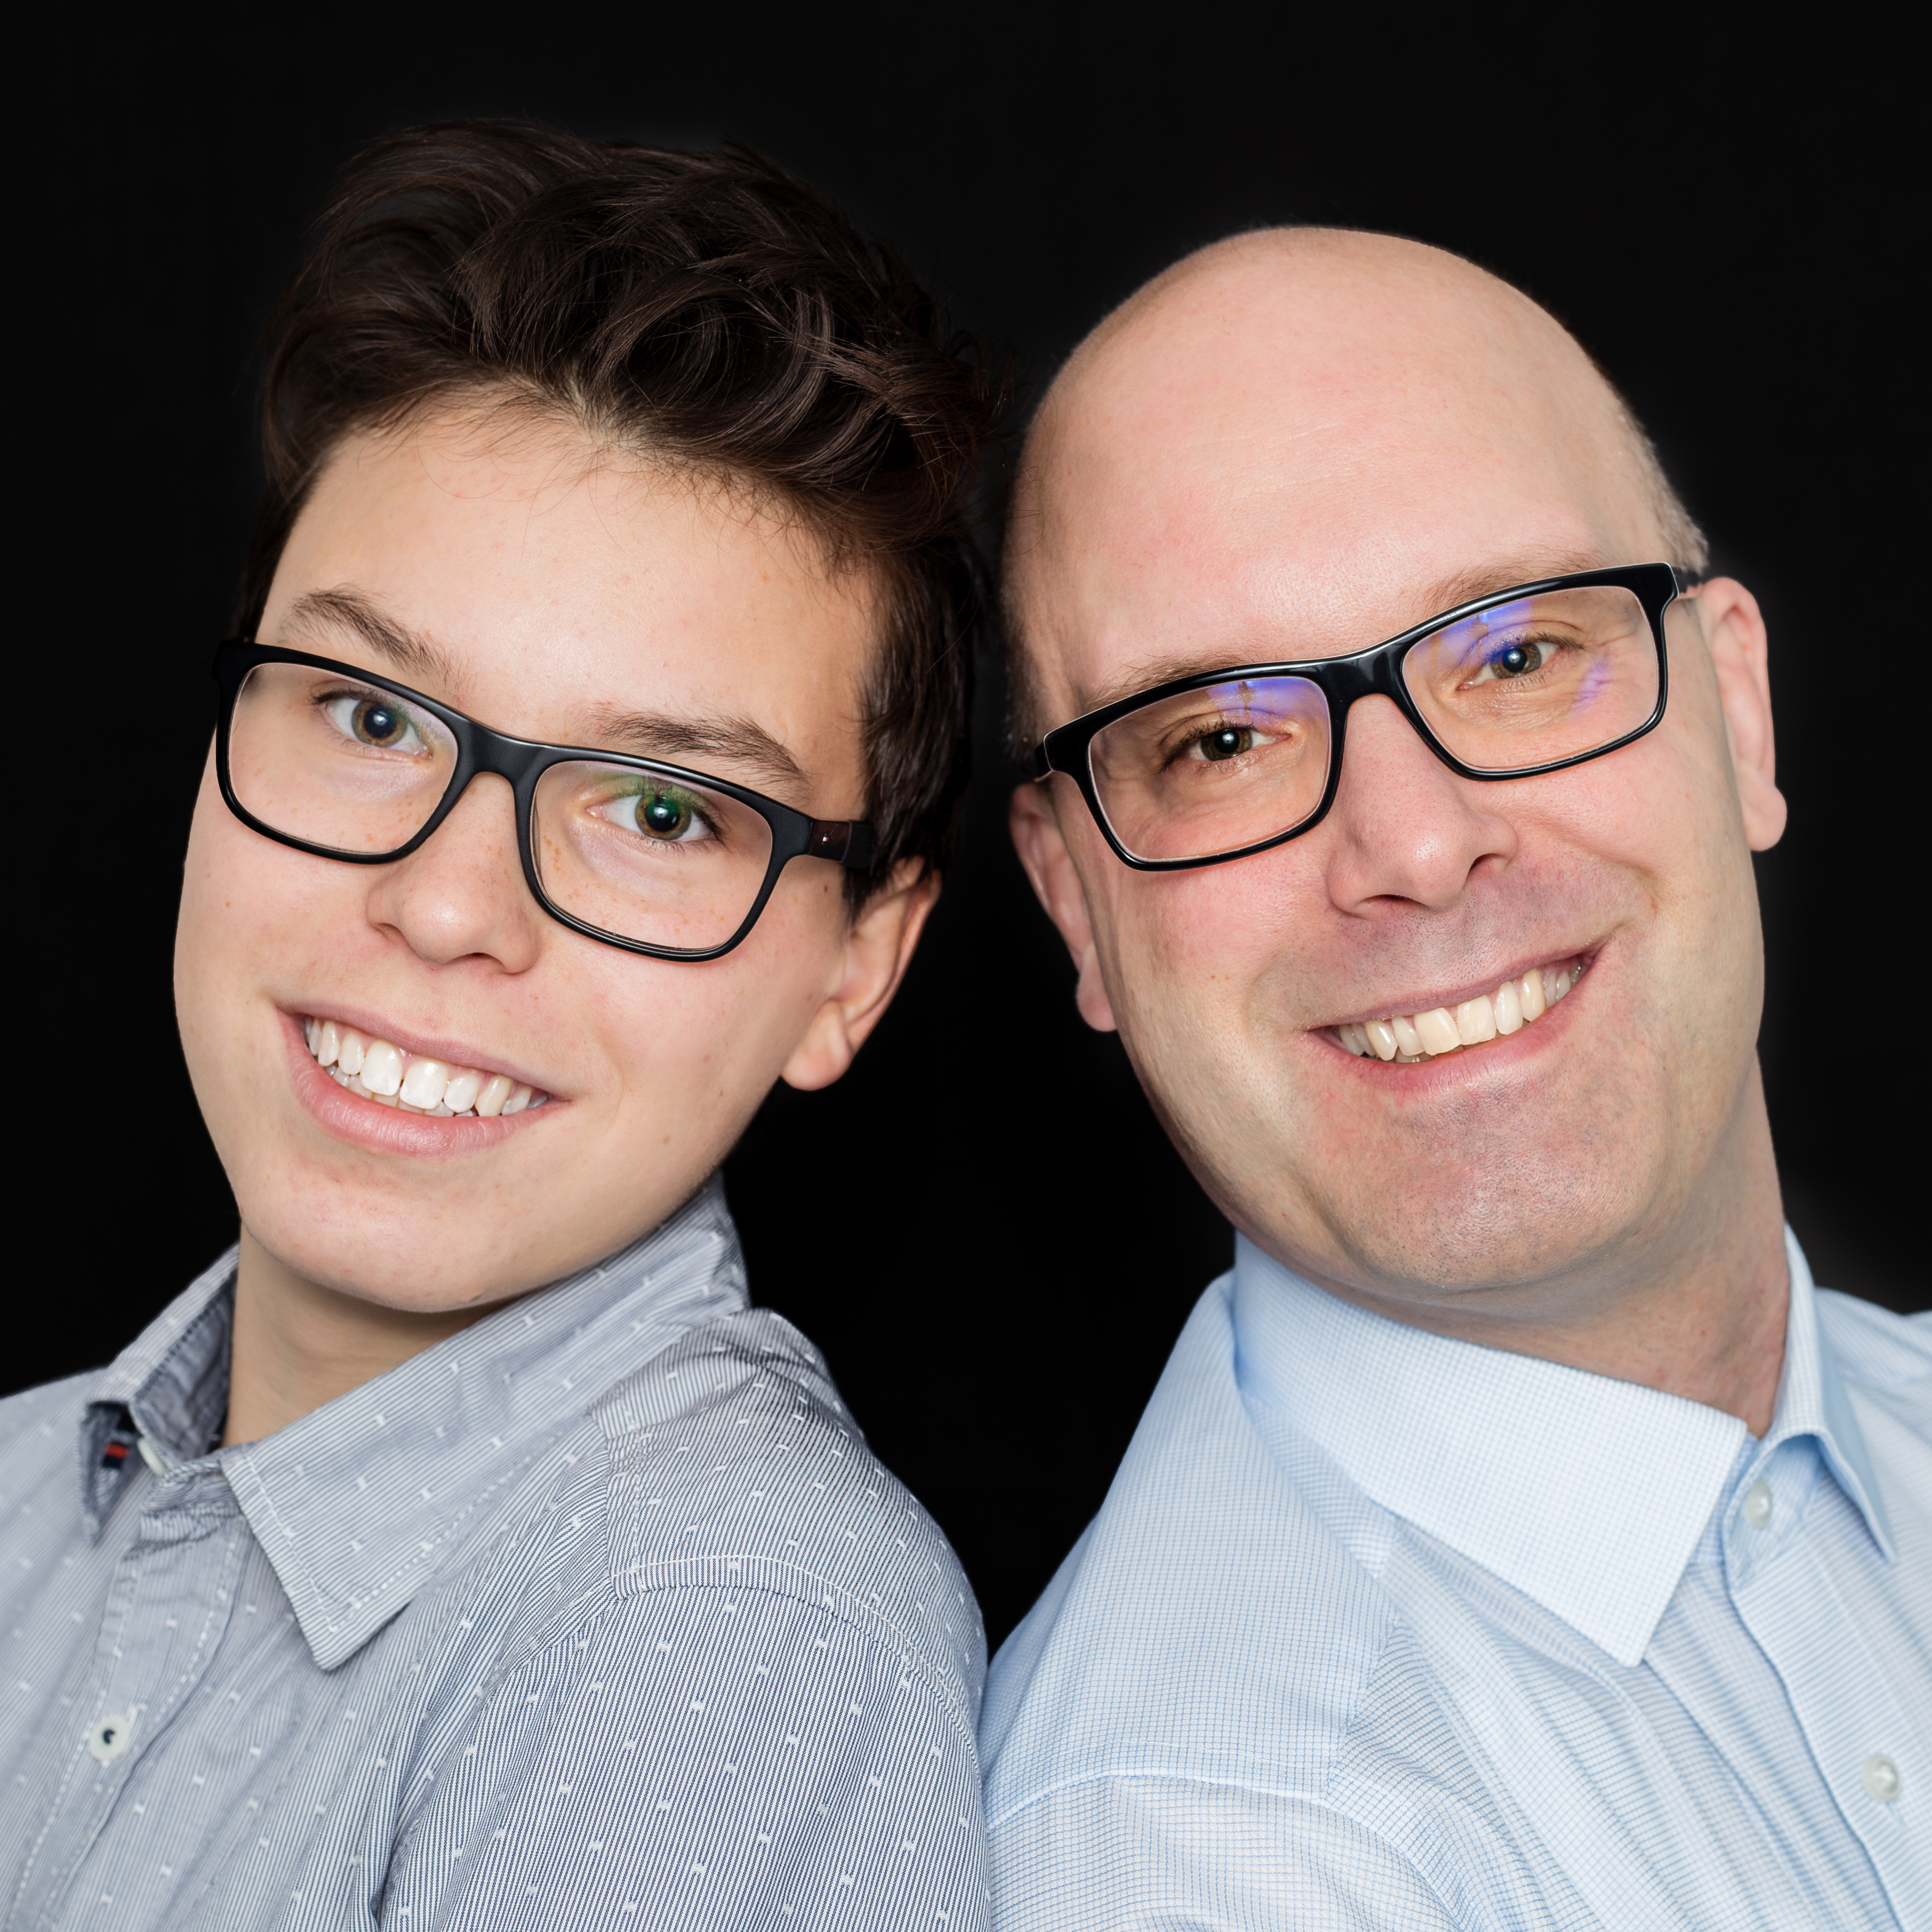 This is us: Julian and Jochen Fehlbaum